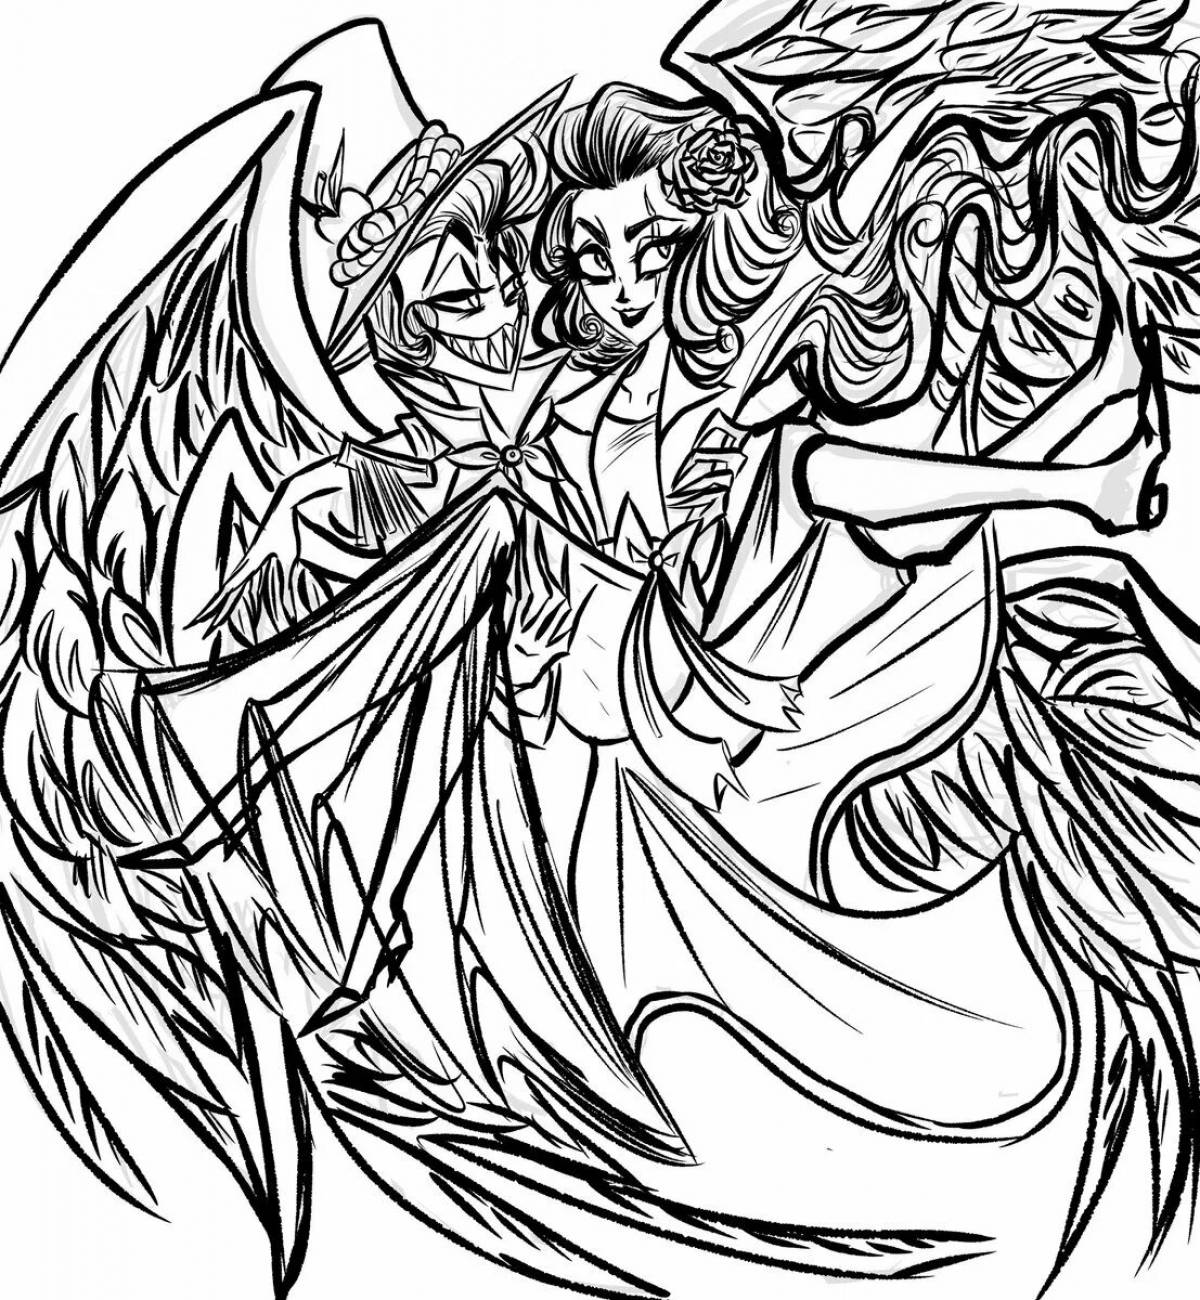 Lucifer's mesmerizing coloring page